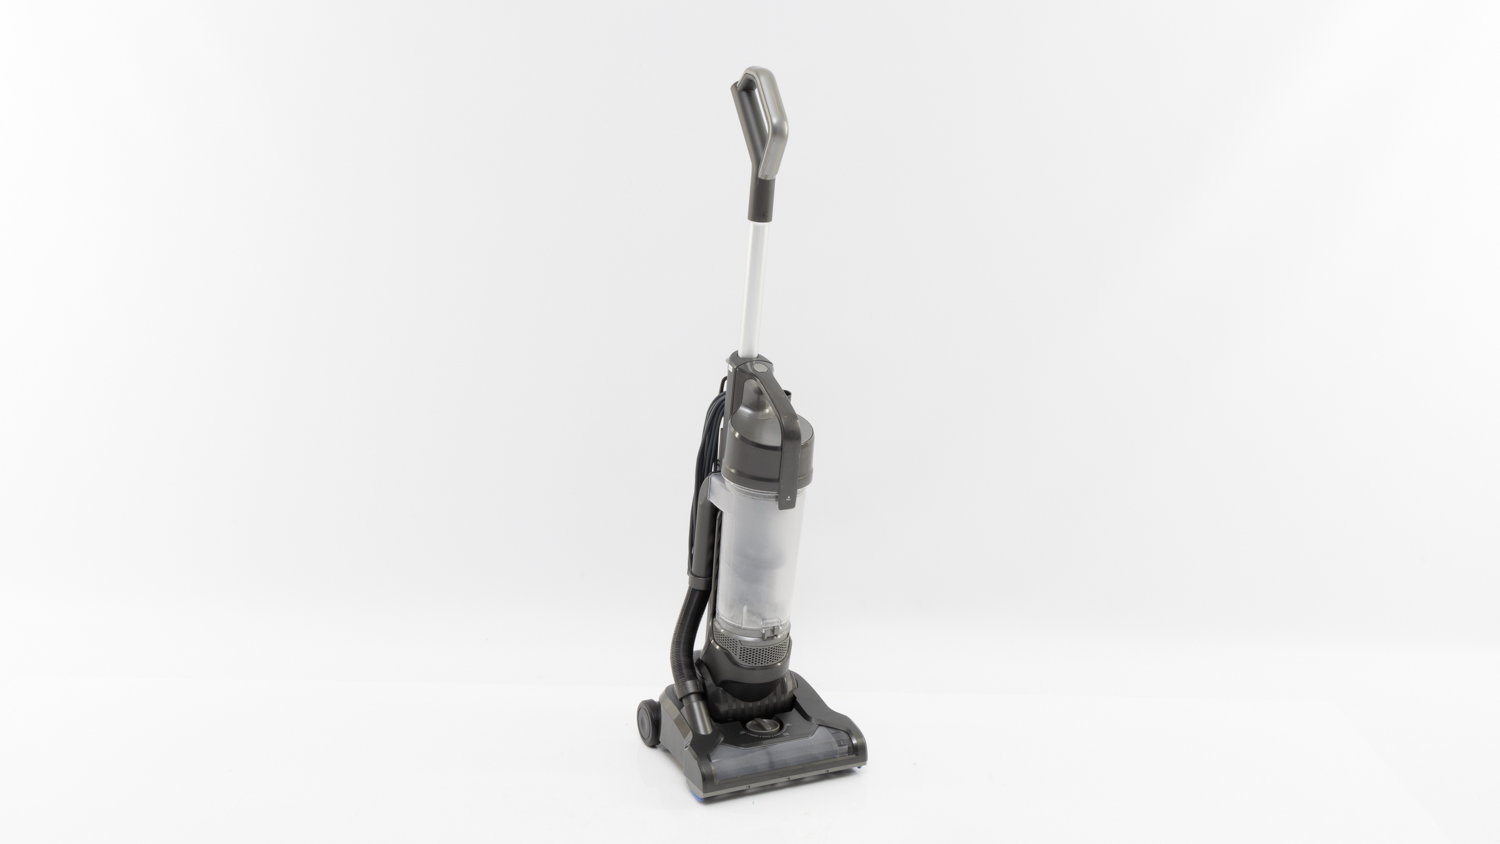 Kmart 1200W Upright Vacuum Cleaner VC-9790 carousel image